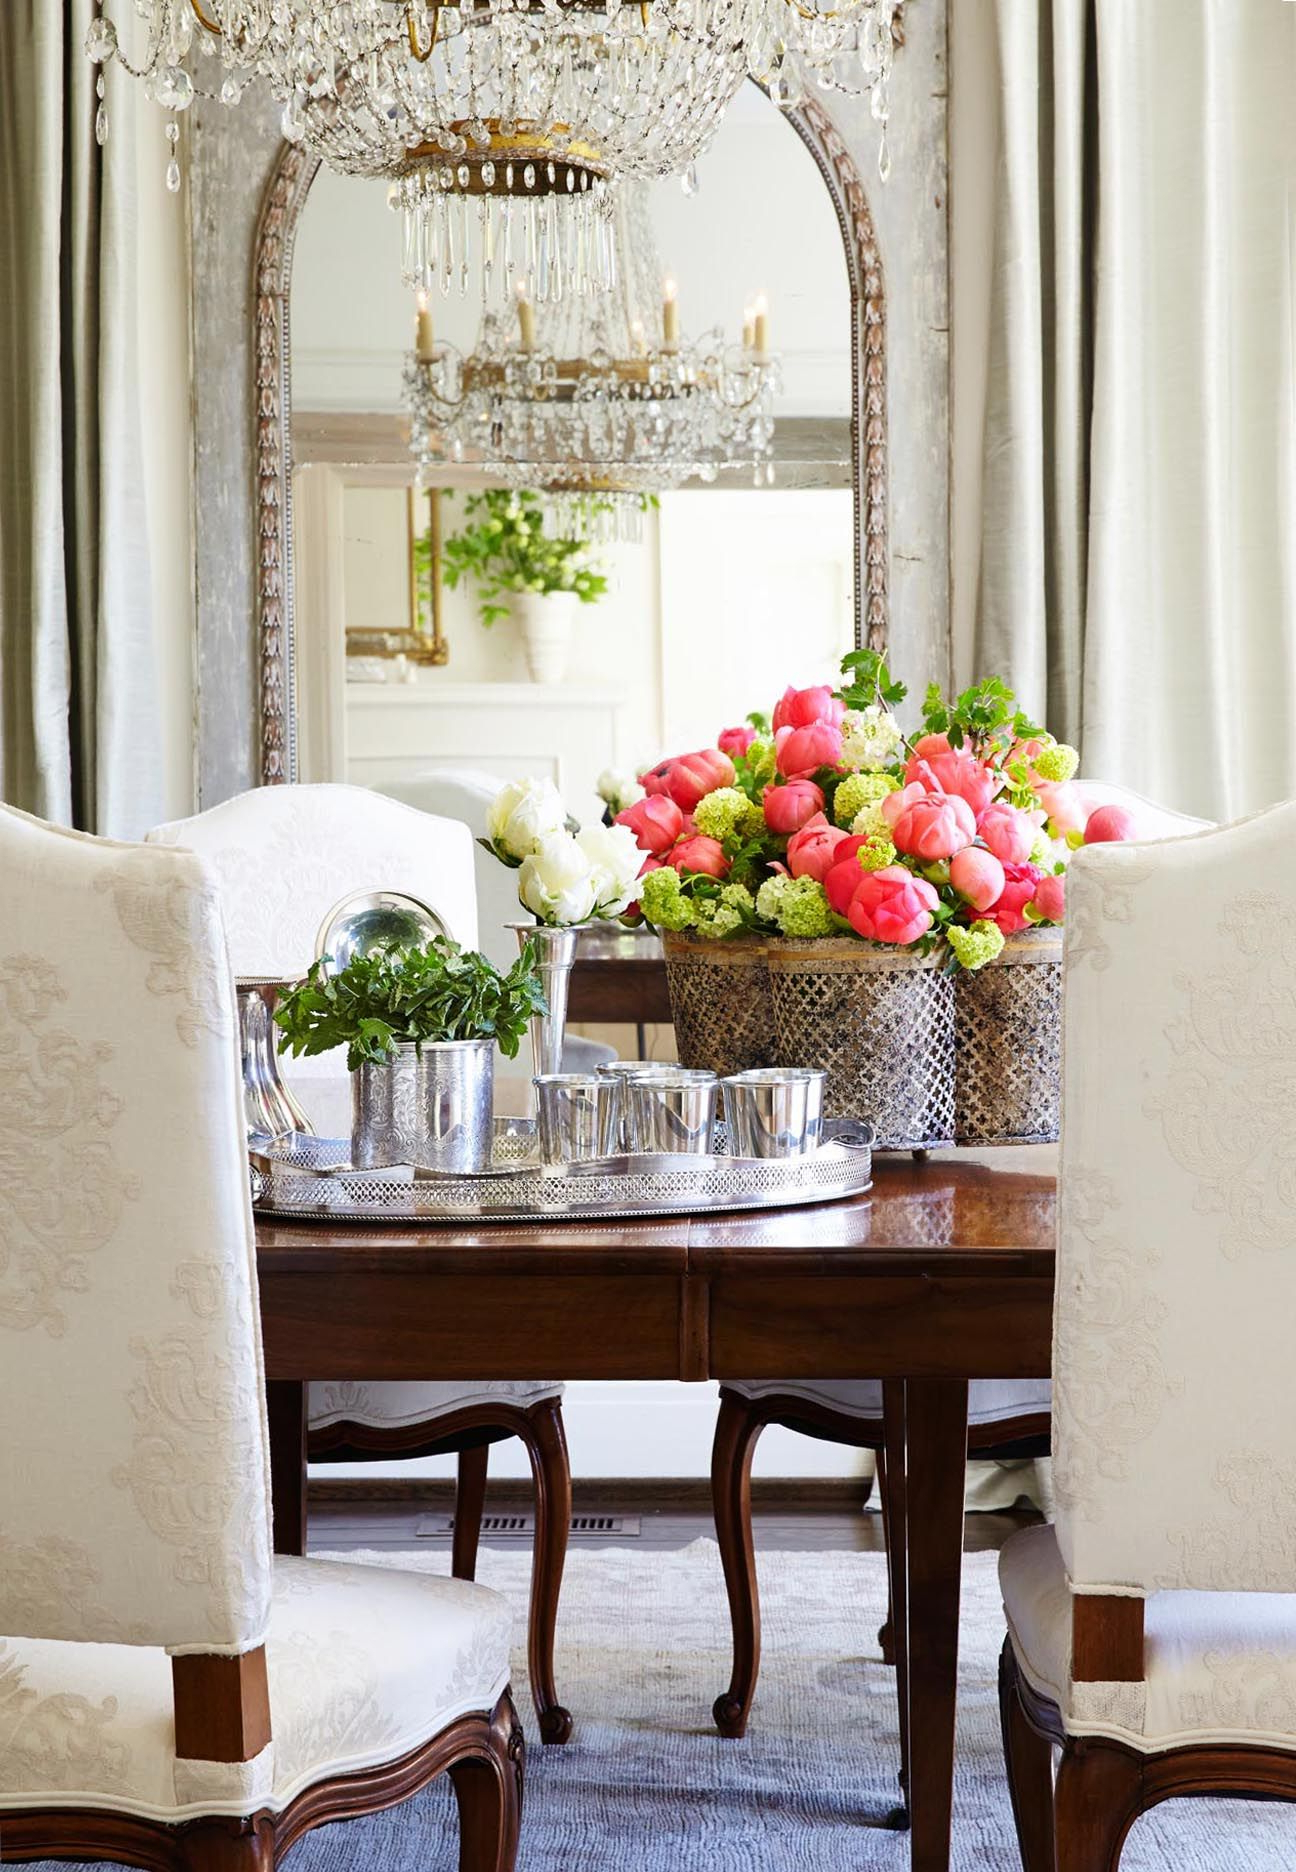 Niermann Weeks Quatrefoil Tole Planter Holds A Colorful Array Of Flowers In This Dining Room